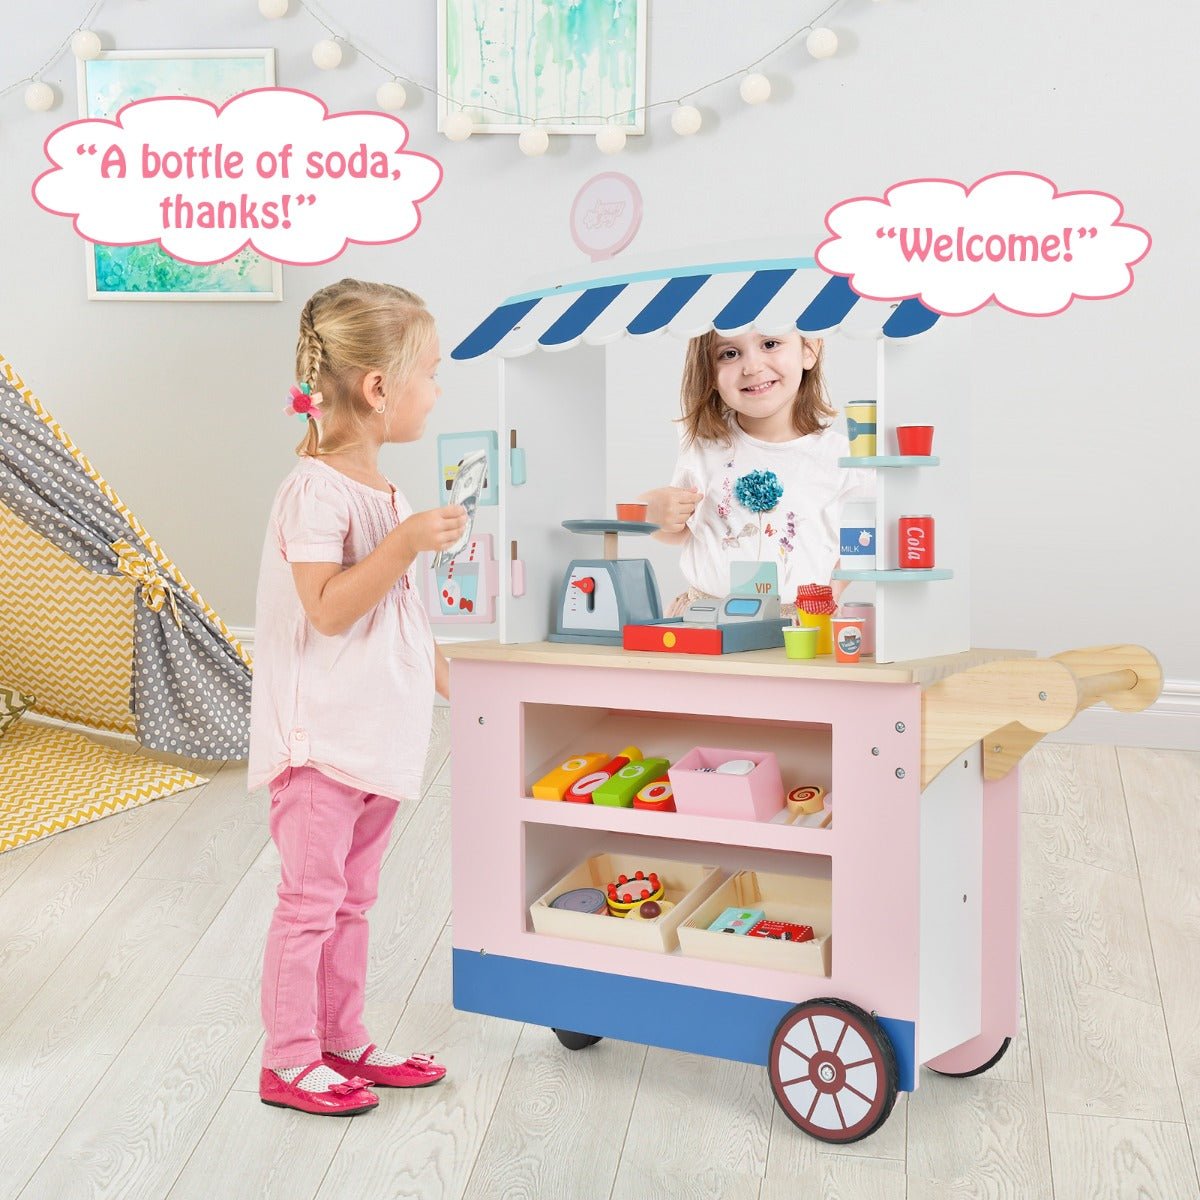 Explore, Learn, and Shop with Our Toy Cart Playset